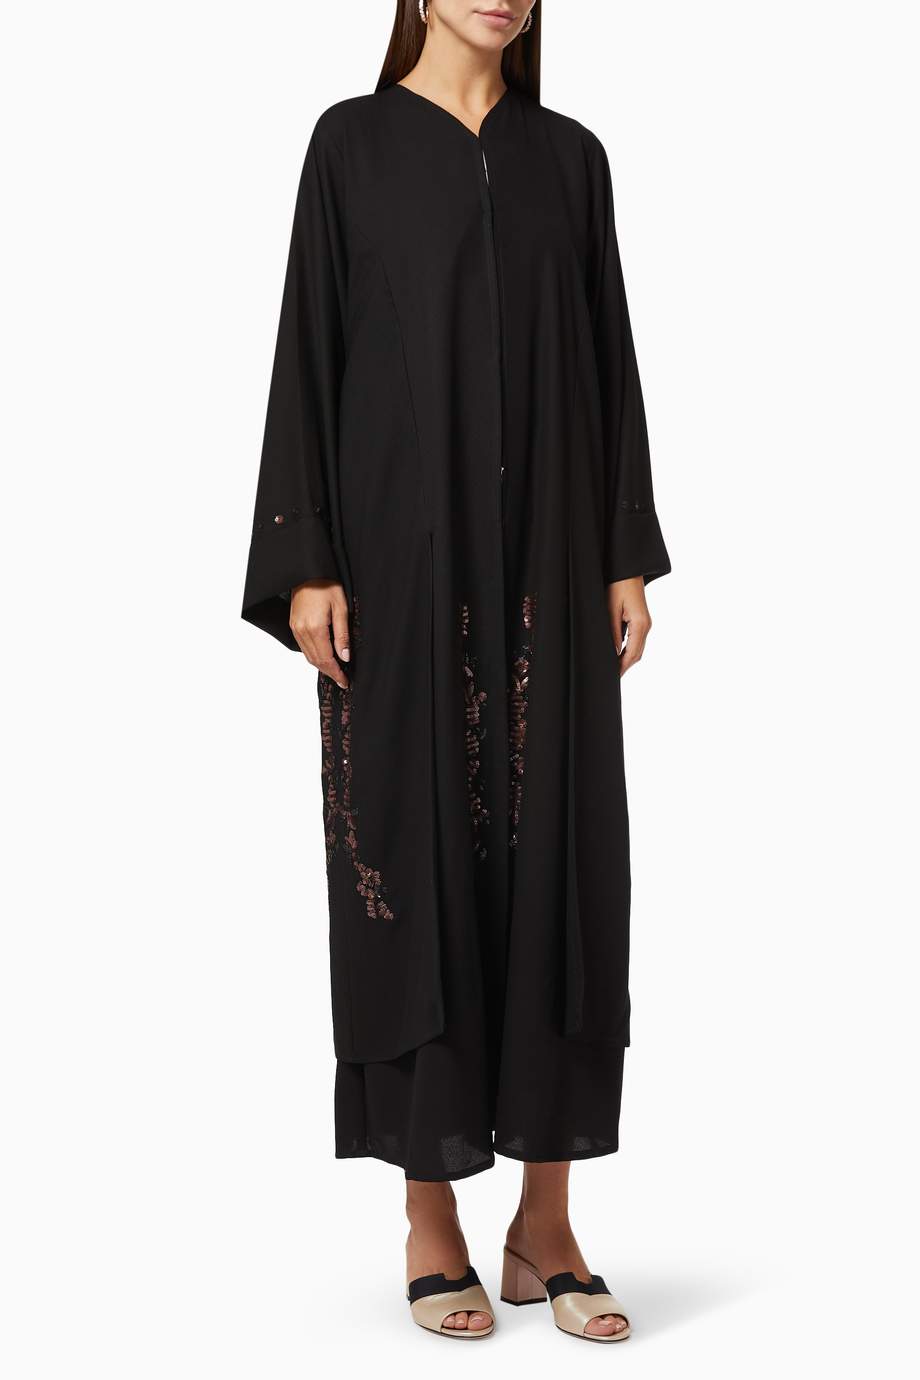 Shop Rauaa official Black Layered Abaya with Sequin Embroidery for ...